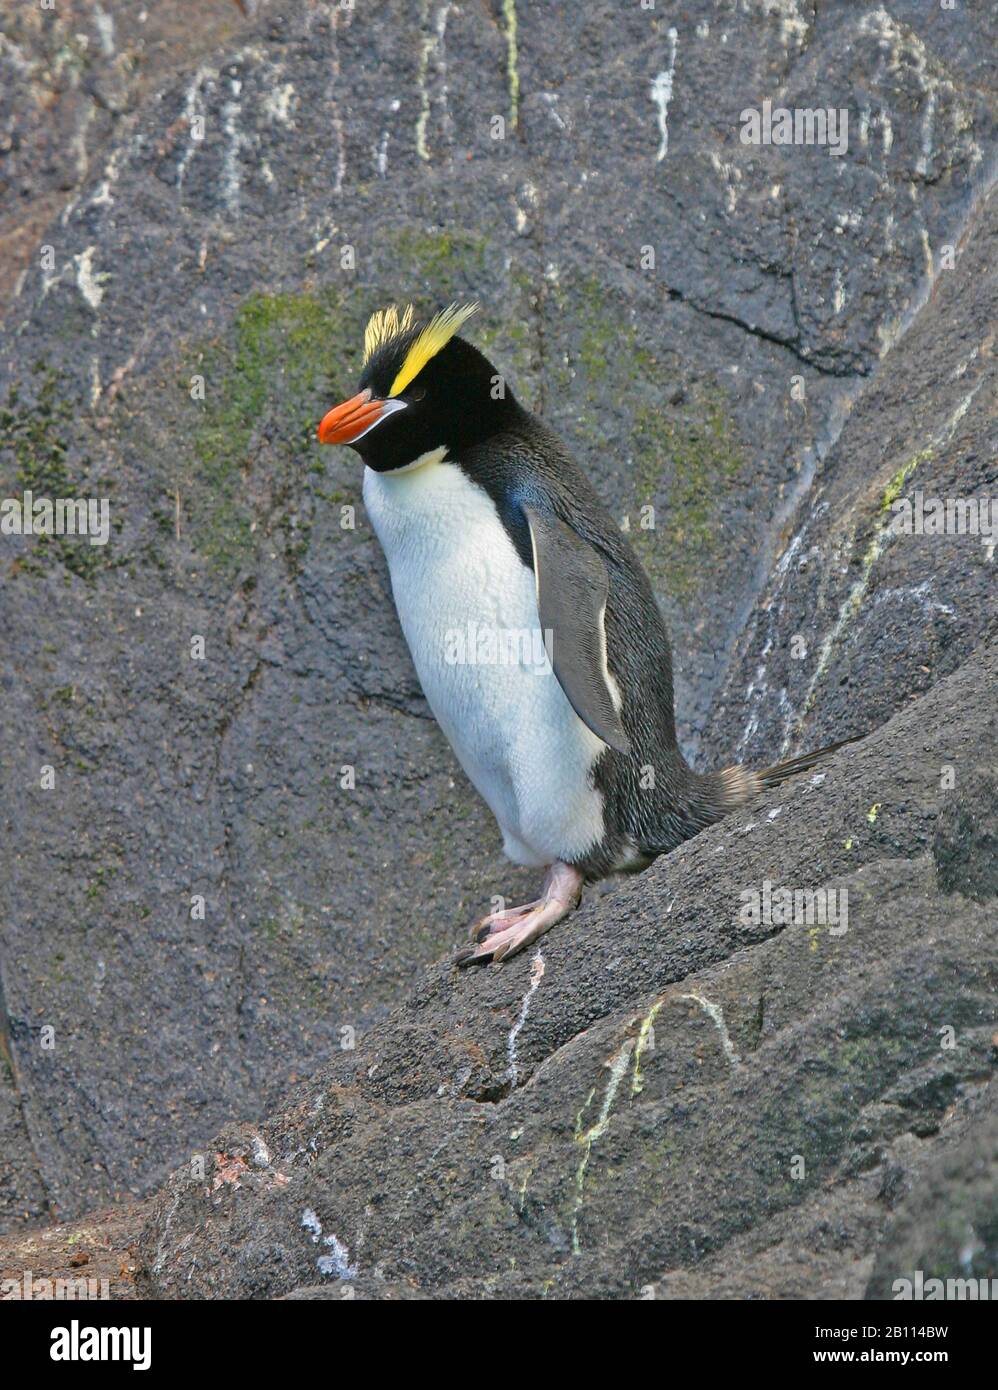 big-crested penguin (Eudyptes sclateri), stands on a rock, New Zealand Stock Photo